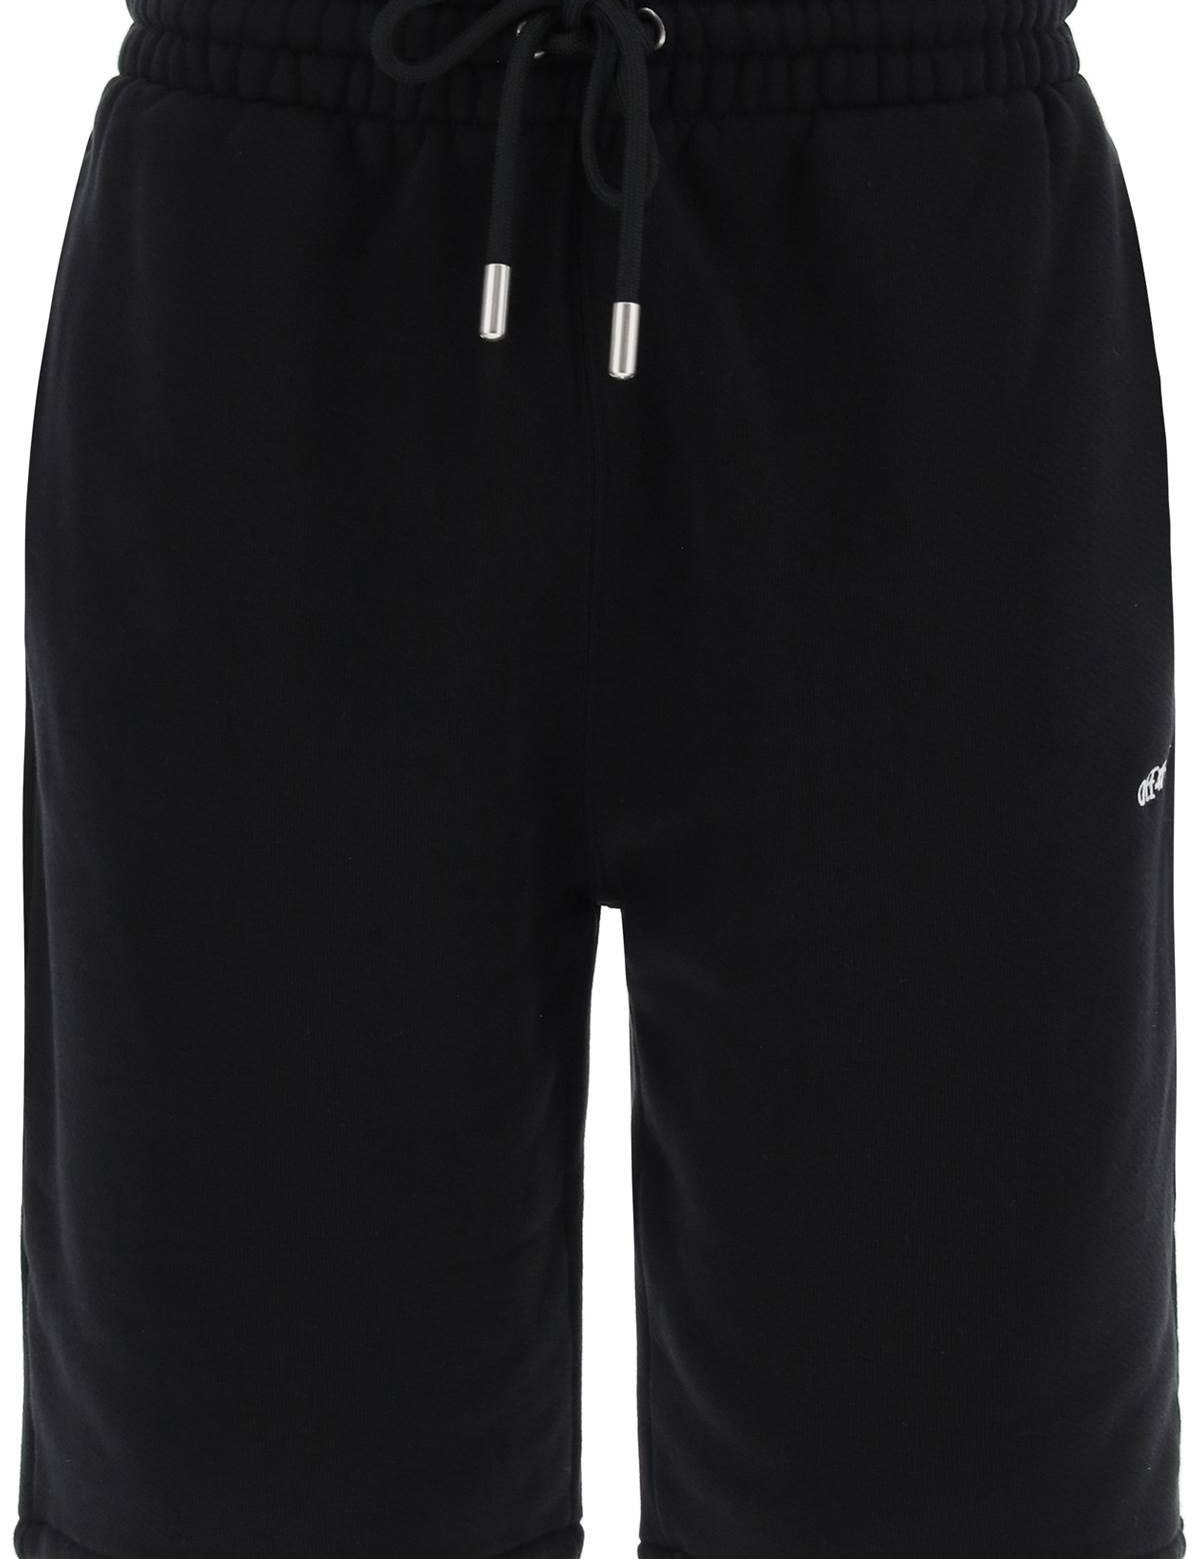 off-white-sporty-bermuda-shorts-with-embroidered-arrow.jpg